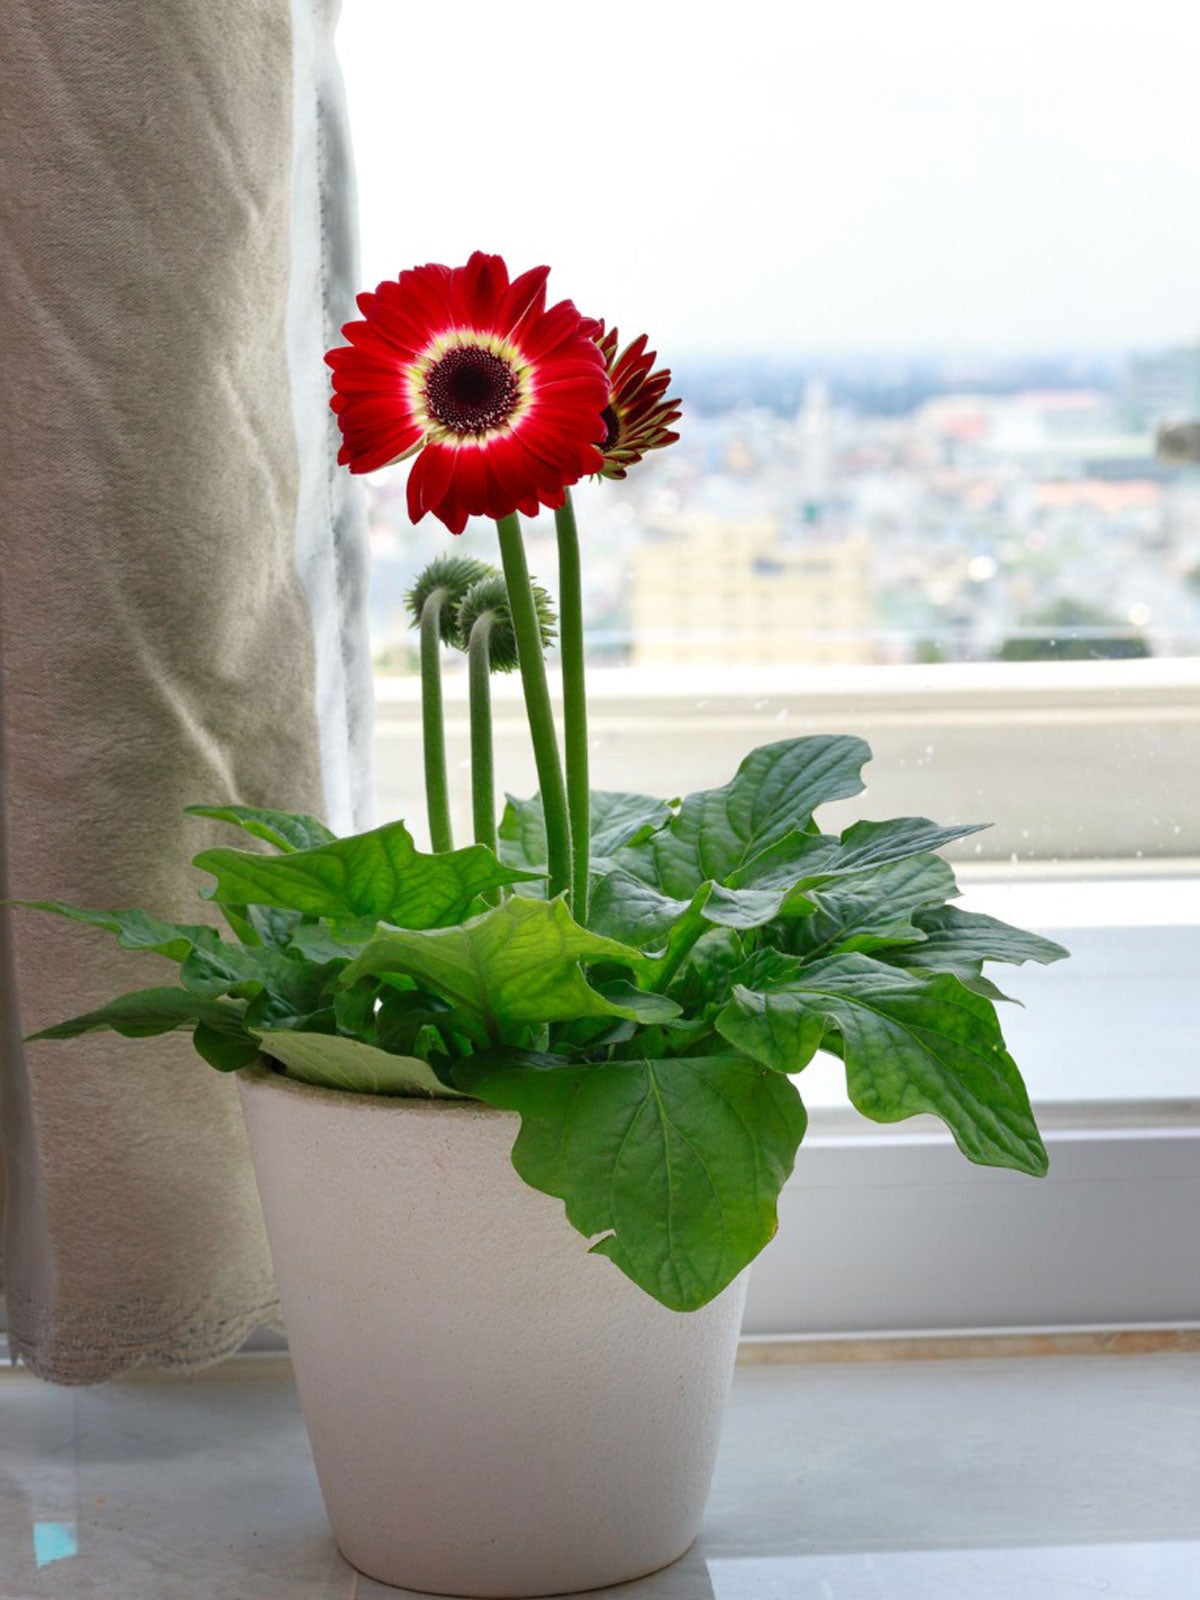 Overwintering Potted Gerberas – What To Do With Gerbera Daisies In ...